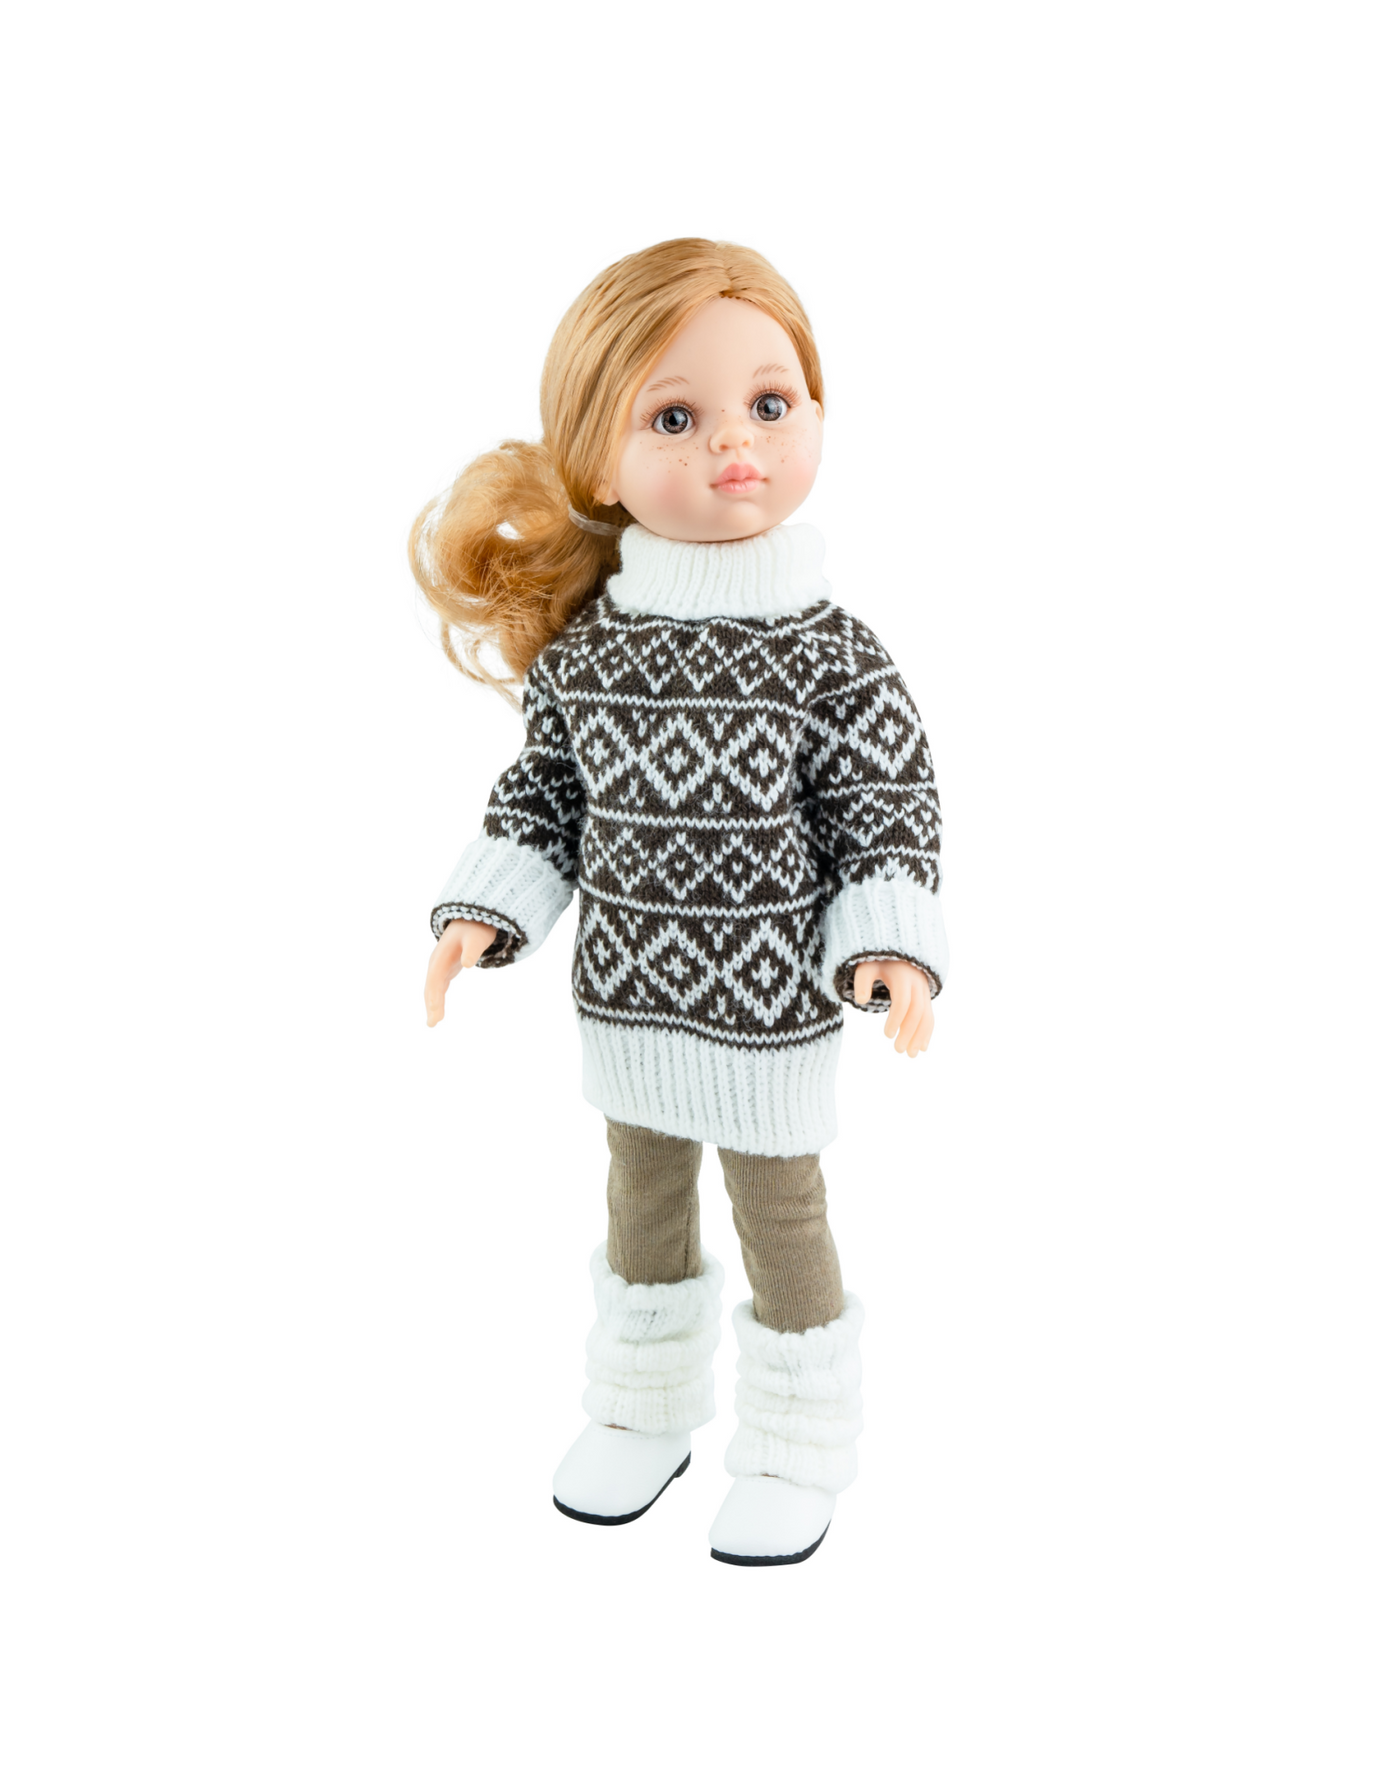 Las Amigas Doll - Dasha with wool sweater and white boots - Paola Reina